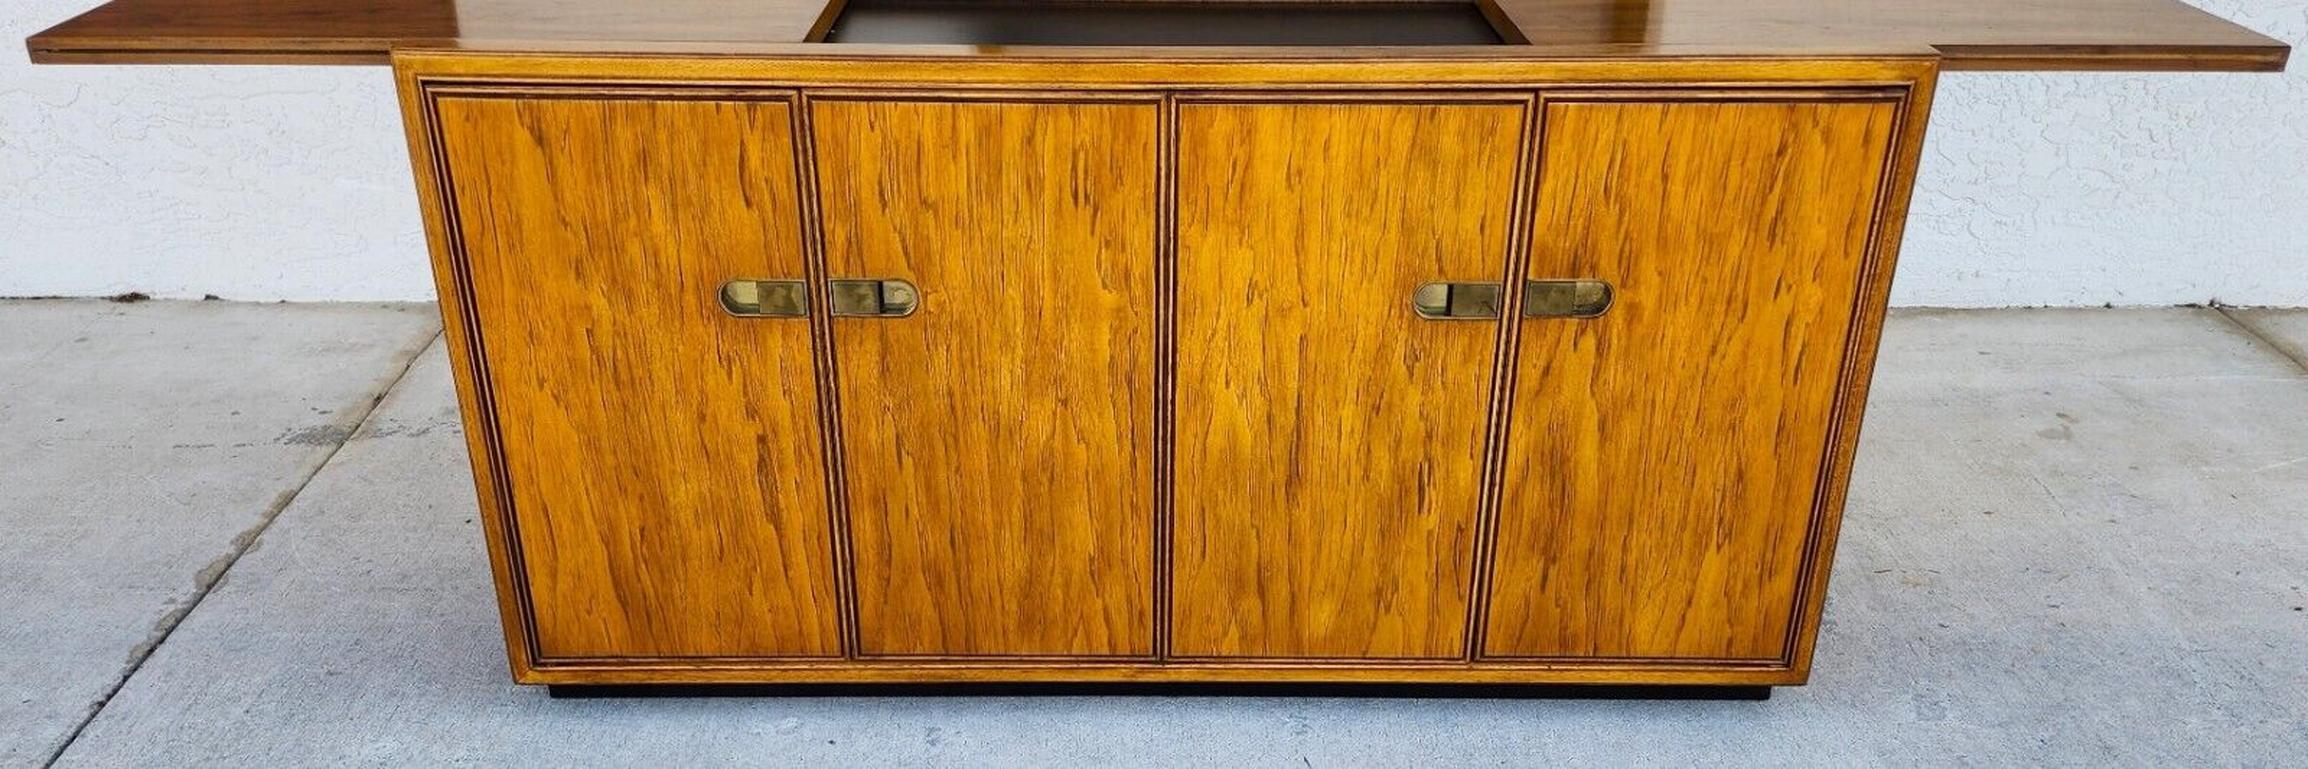 Offering One Of Our Recent Palm Beach Estate Fine Furniture Acquisitions Of A 
Vintage Dry Bar Buffet Sideboard Campaign Style Slide Top PREFACE By DREXEL
Featuring 4 drawers and 2 adjustable shelves. The top drawer has a place for flatware and is